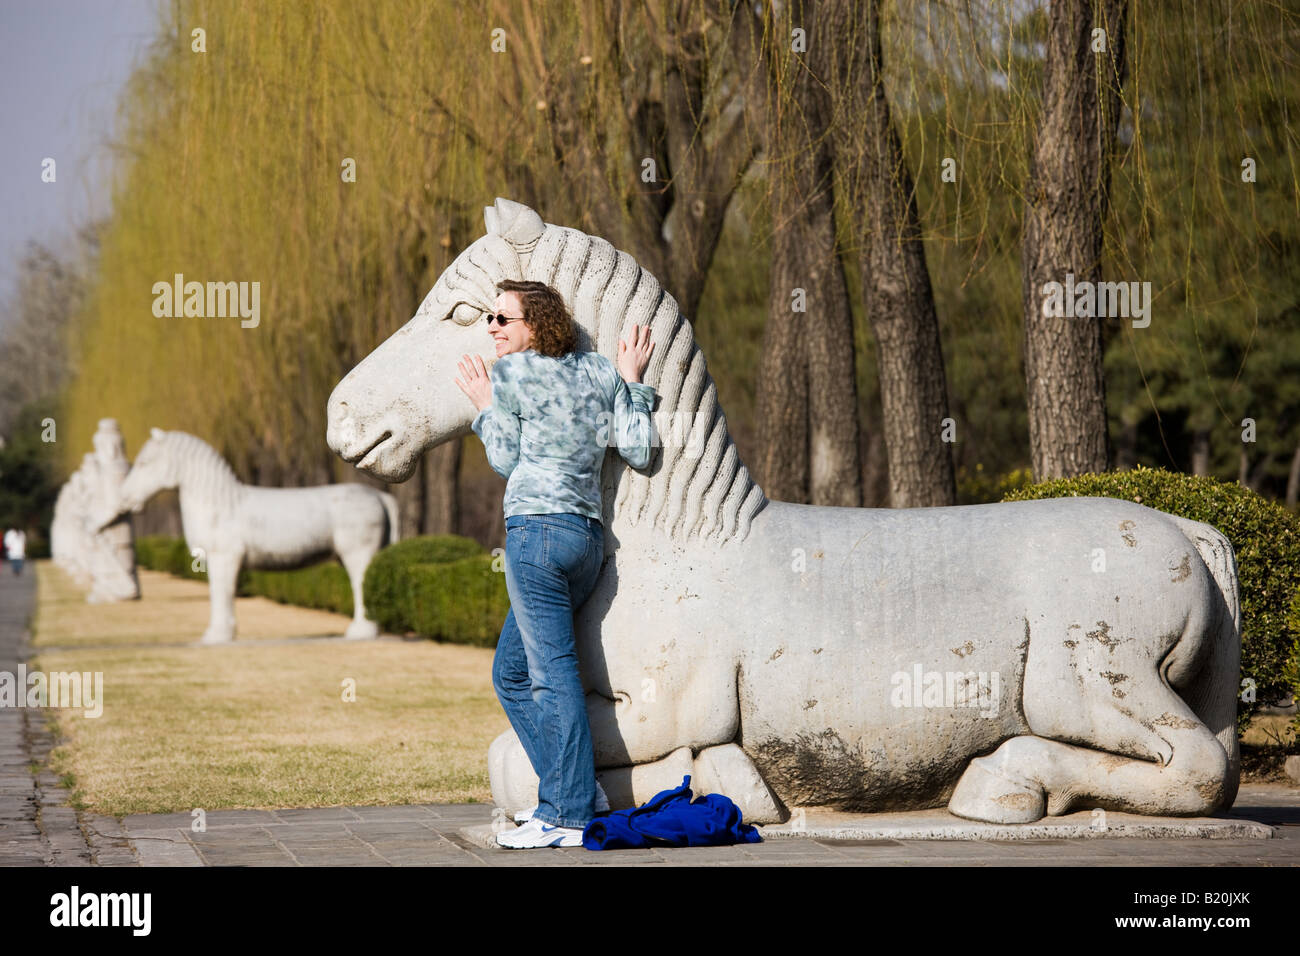 Tourist poses with statue of a resting horse Spirit Way Ming Tombs Changling Beijing China Stock Photo